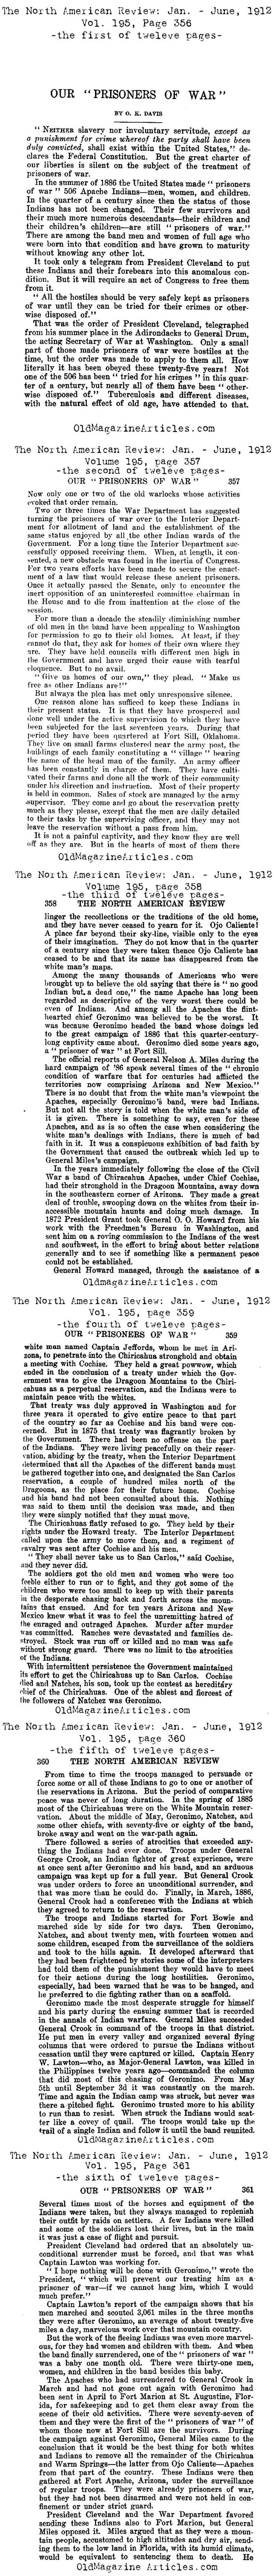 The Trail of Tears (The North American Review, 1912)